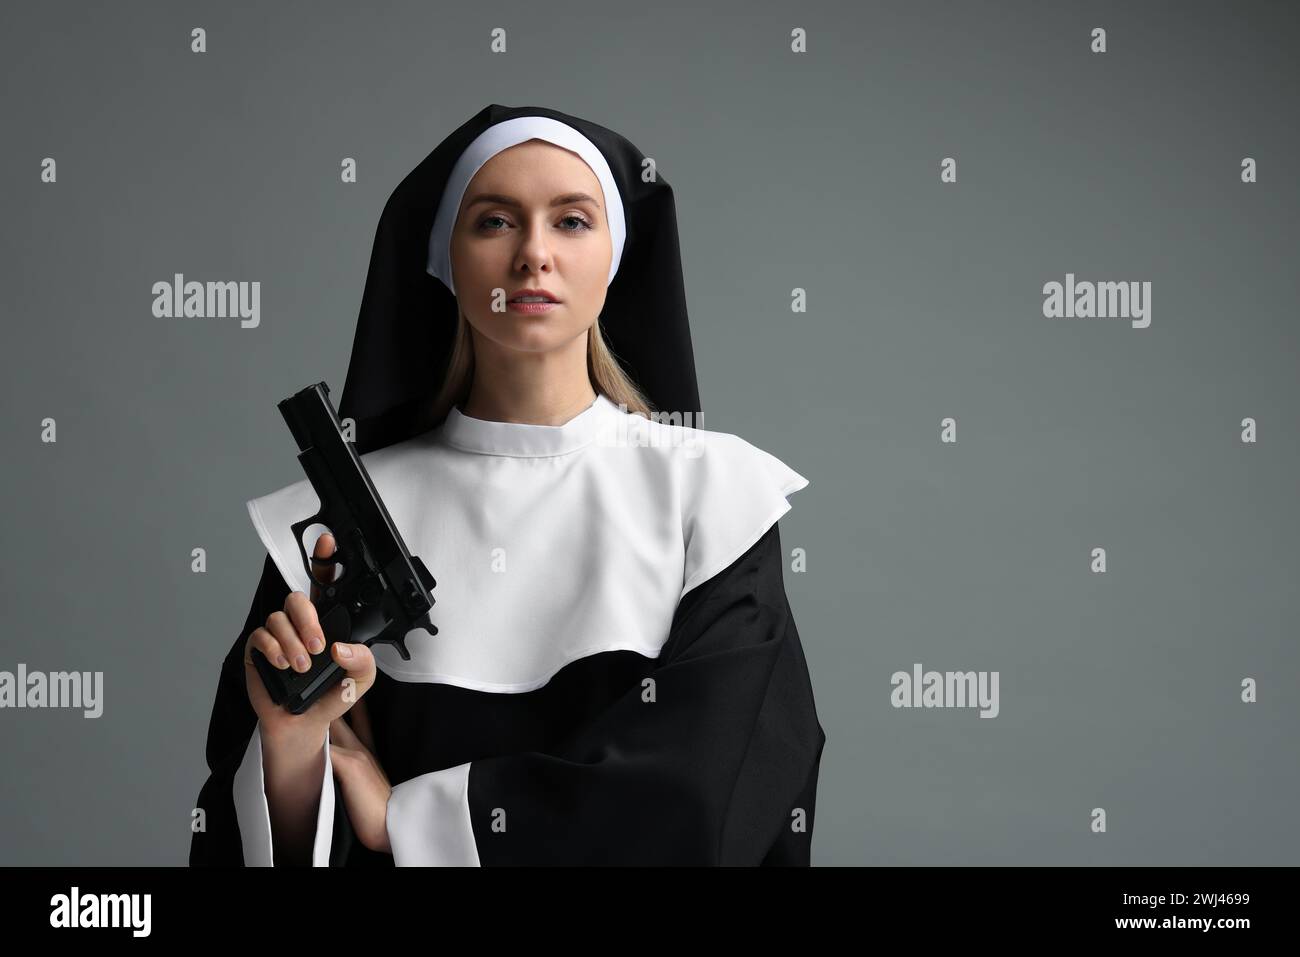 Woman in nun habit holding handgun on grey background. Space for text Stock Photo